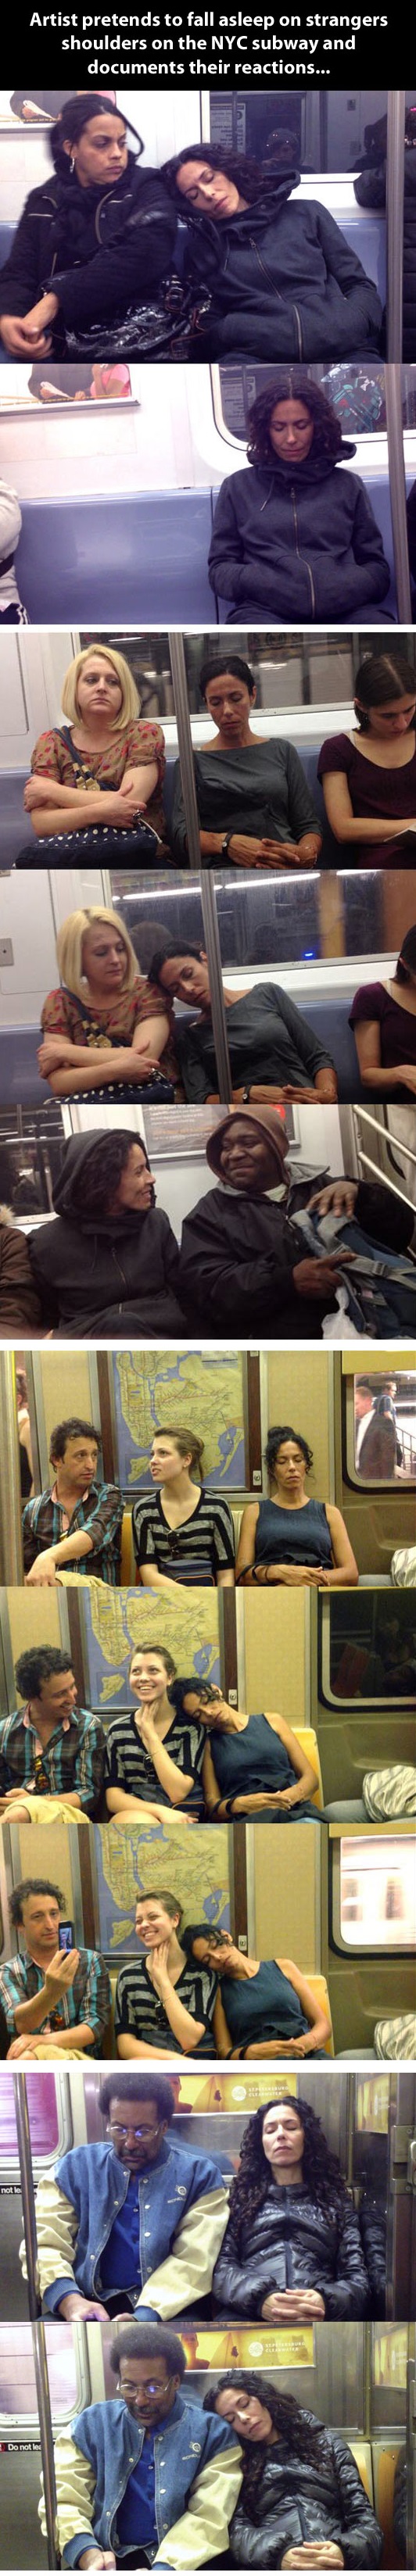 funny-picture-artist-reaction-strangers-photo